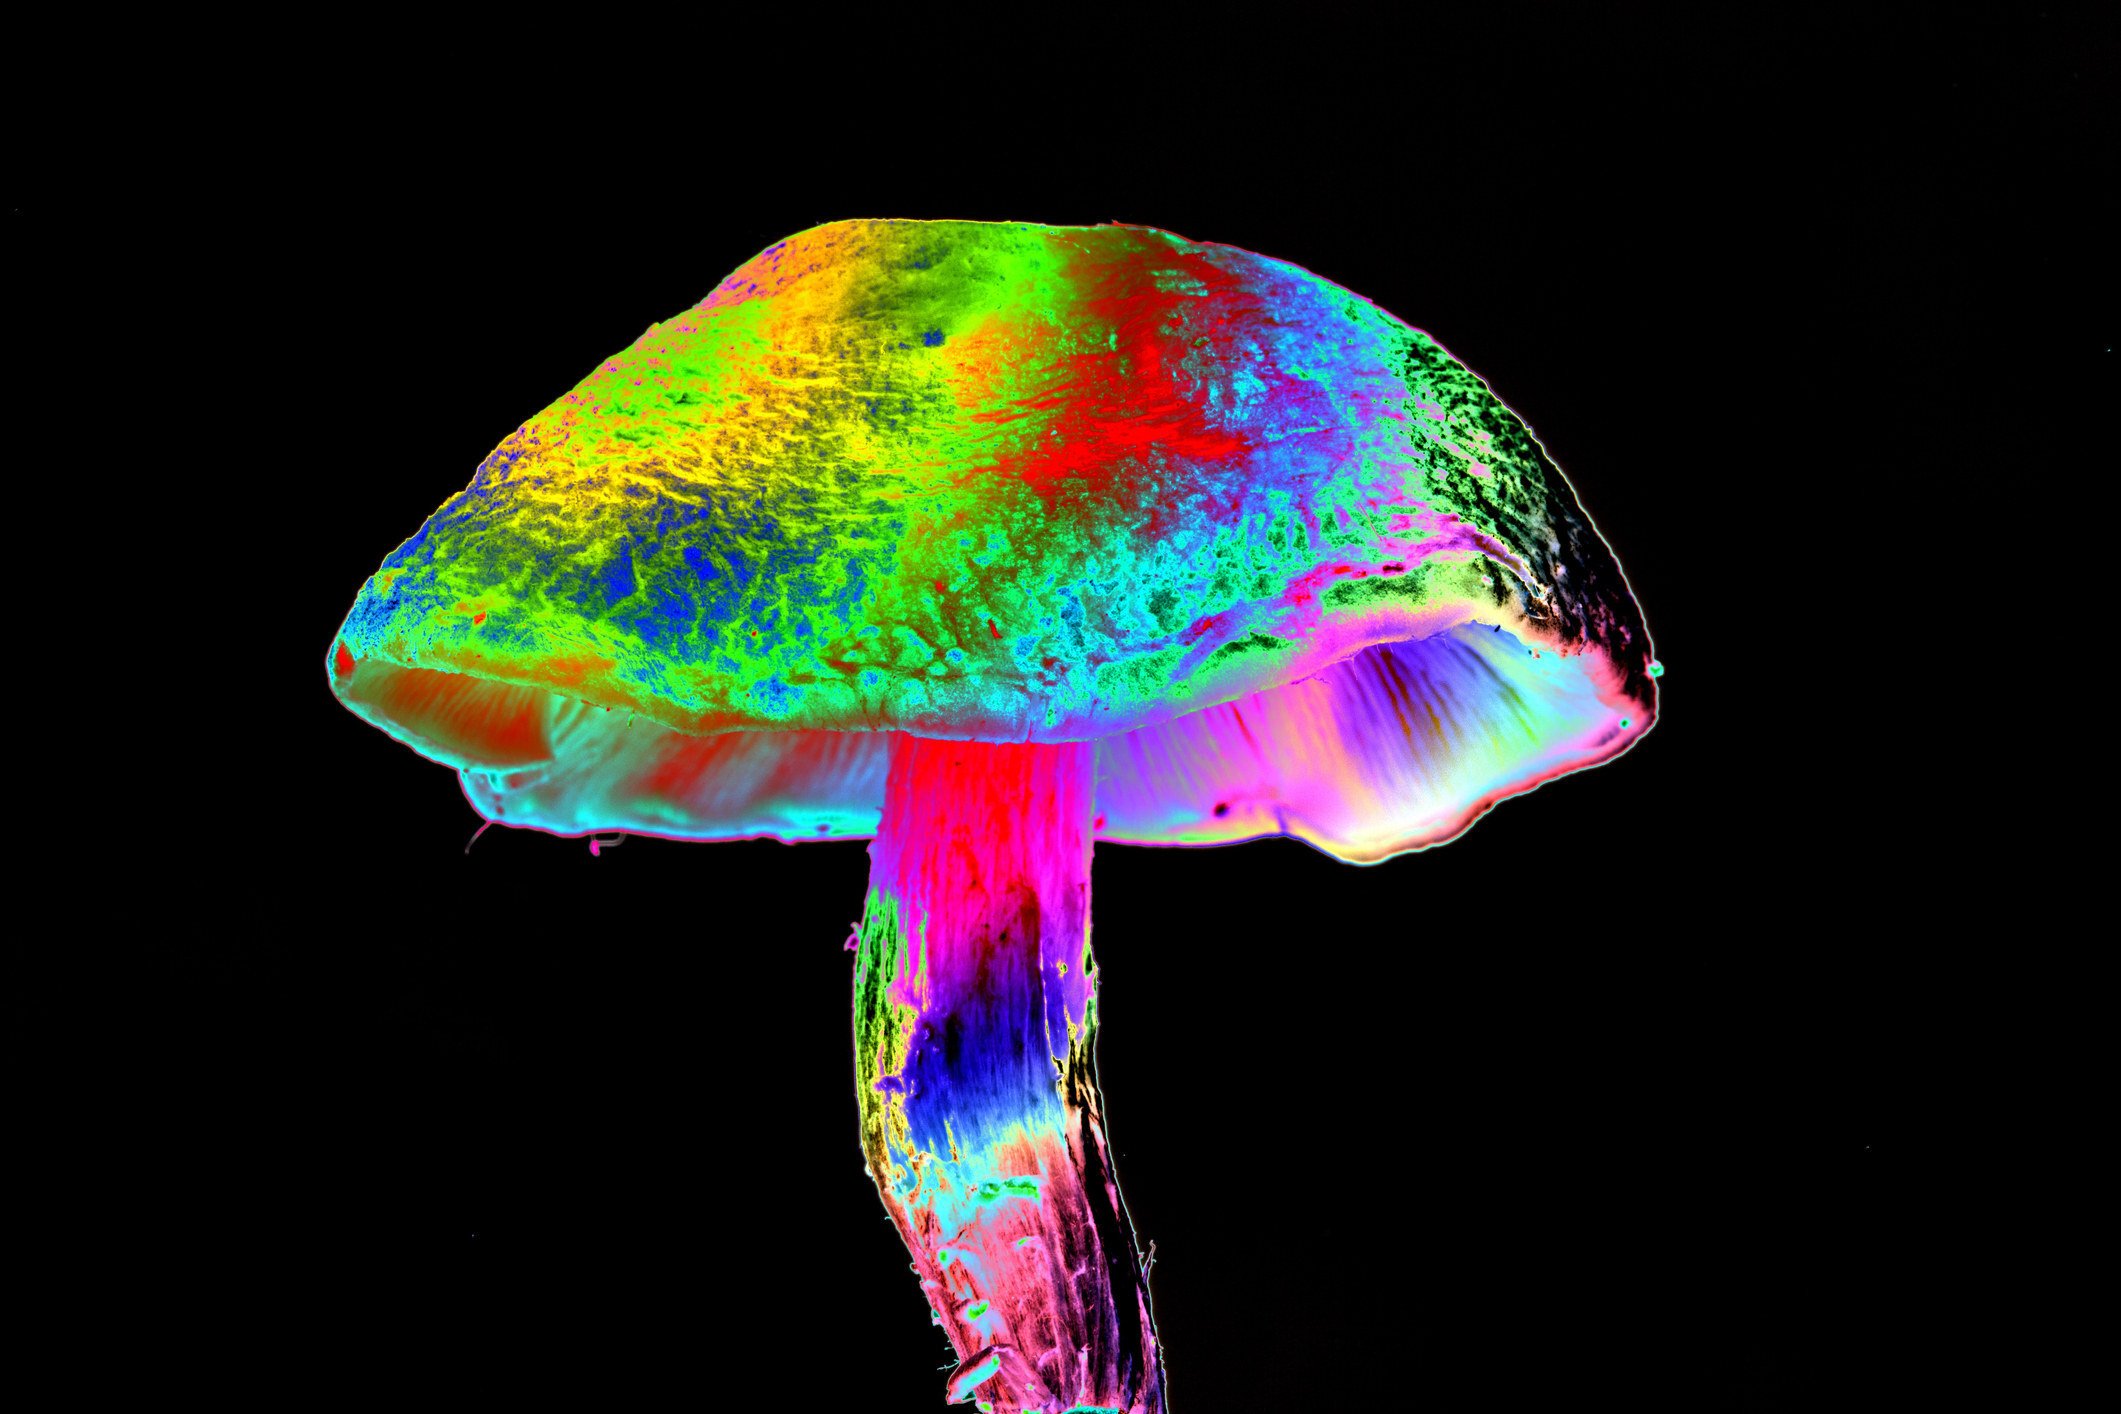 Hermès is experimenting with one very magic mushroom